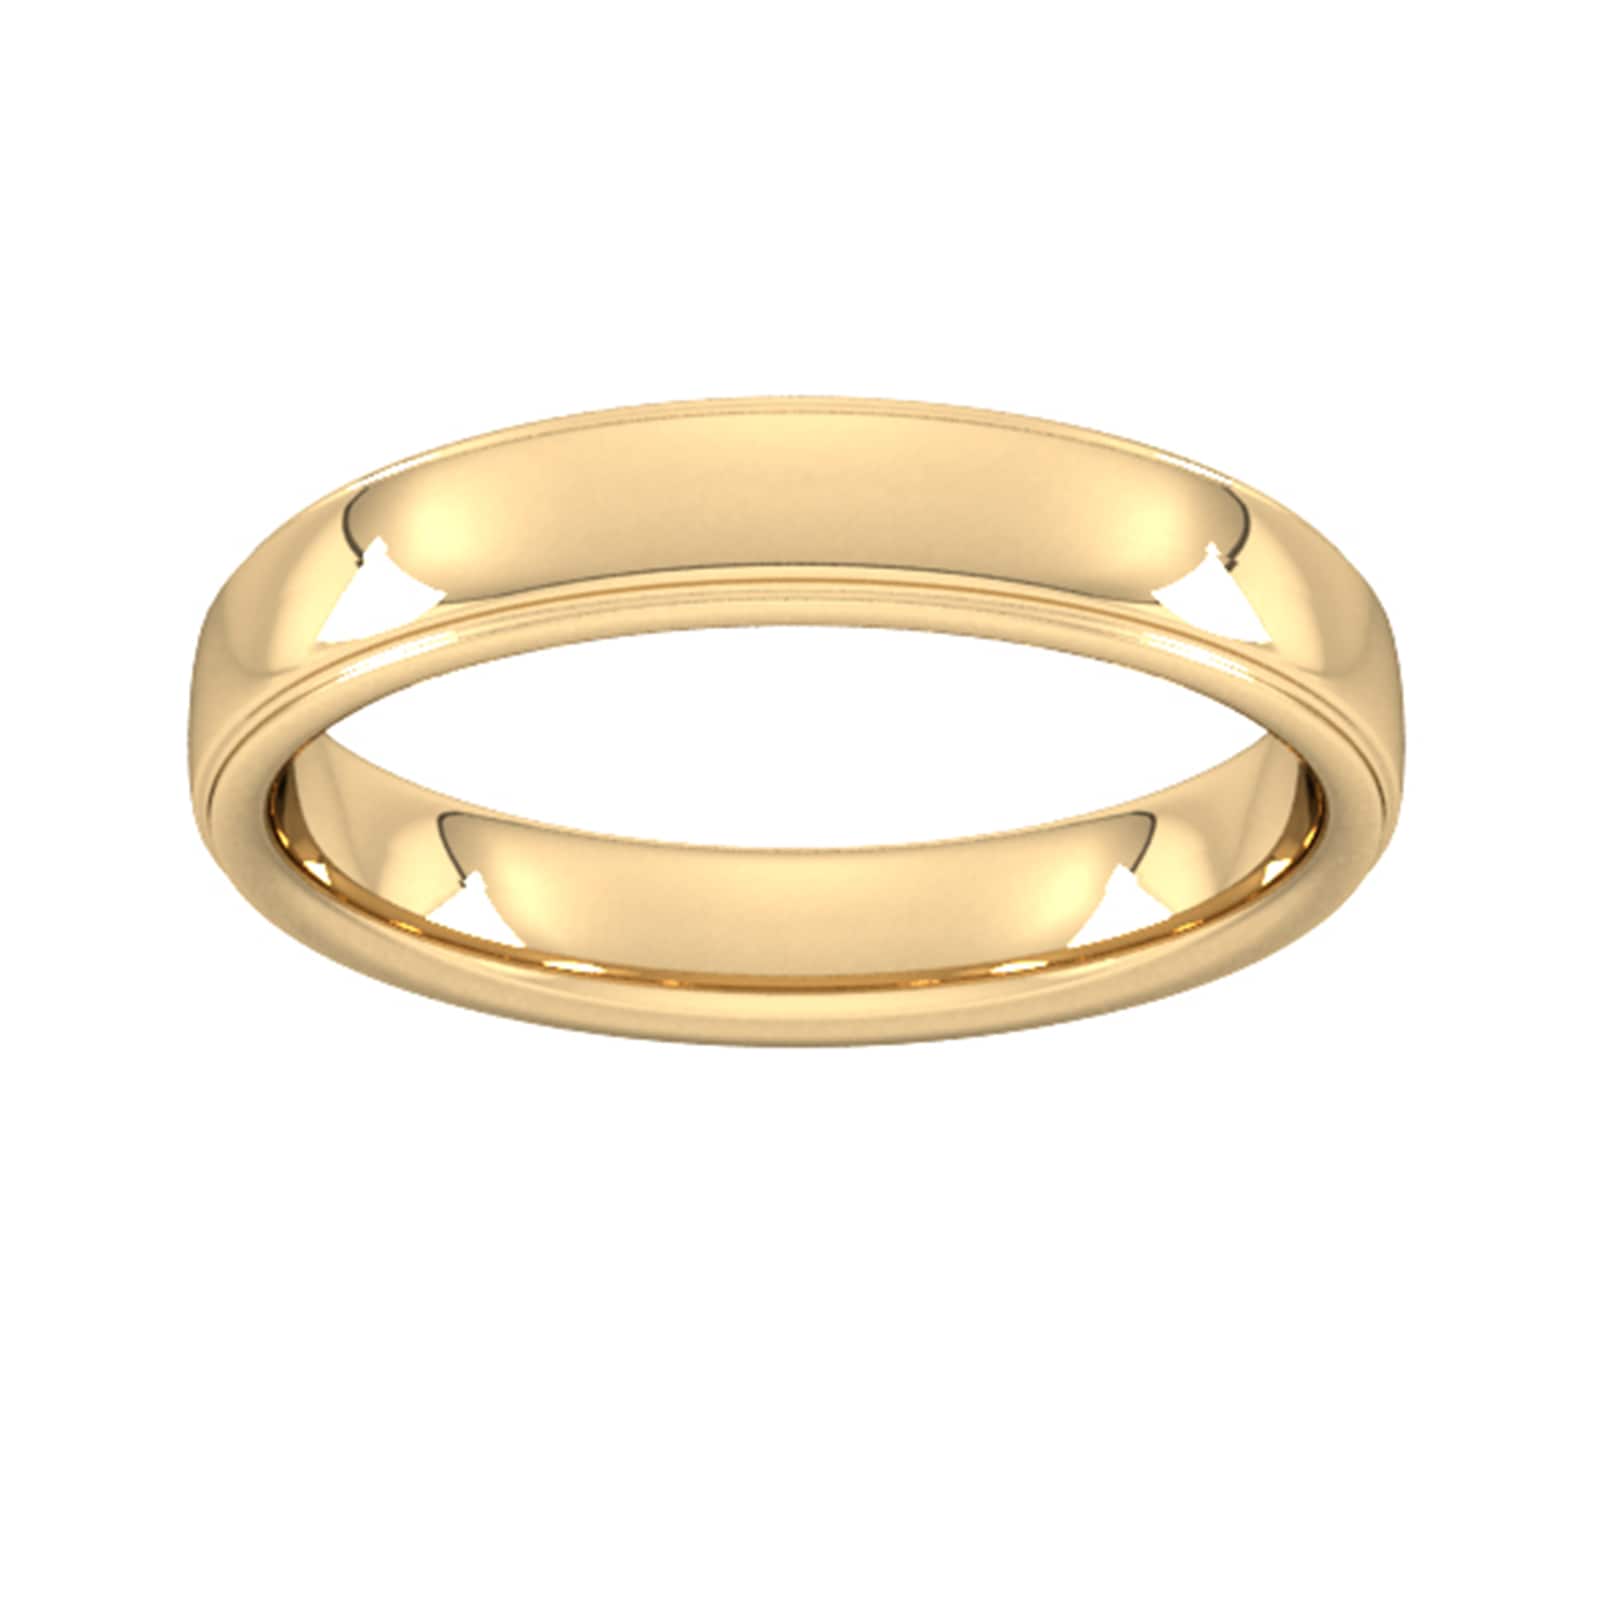 4mm Slight Court Heavy Polished Finish With Grooves Wedding Ring In 18 Carat Yellow Gold - Ring Size G